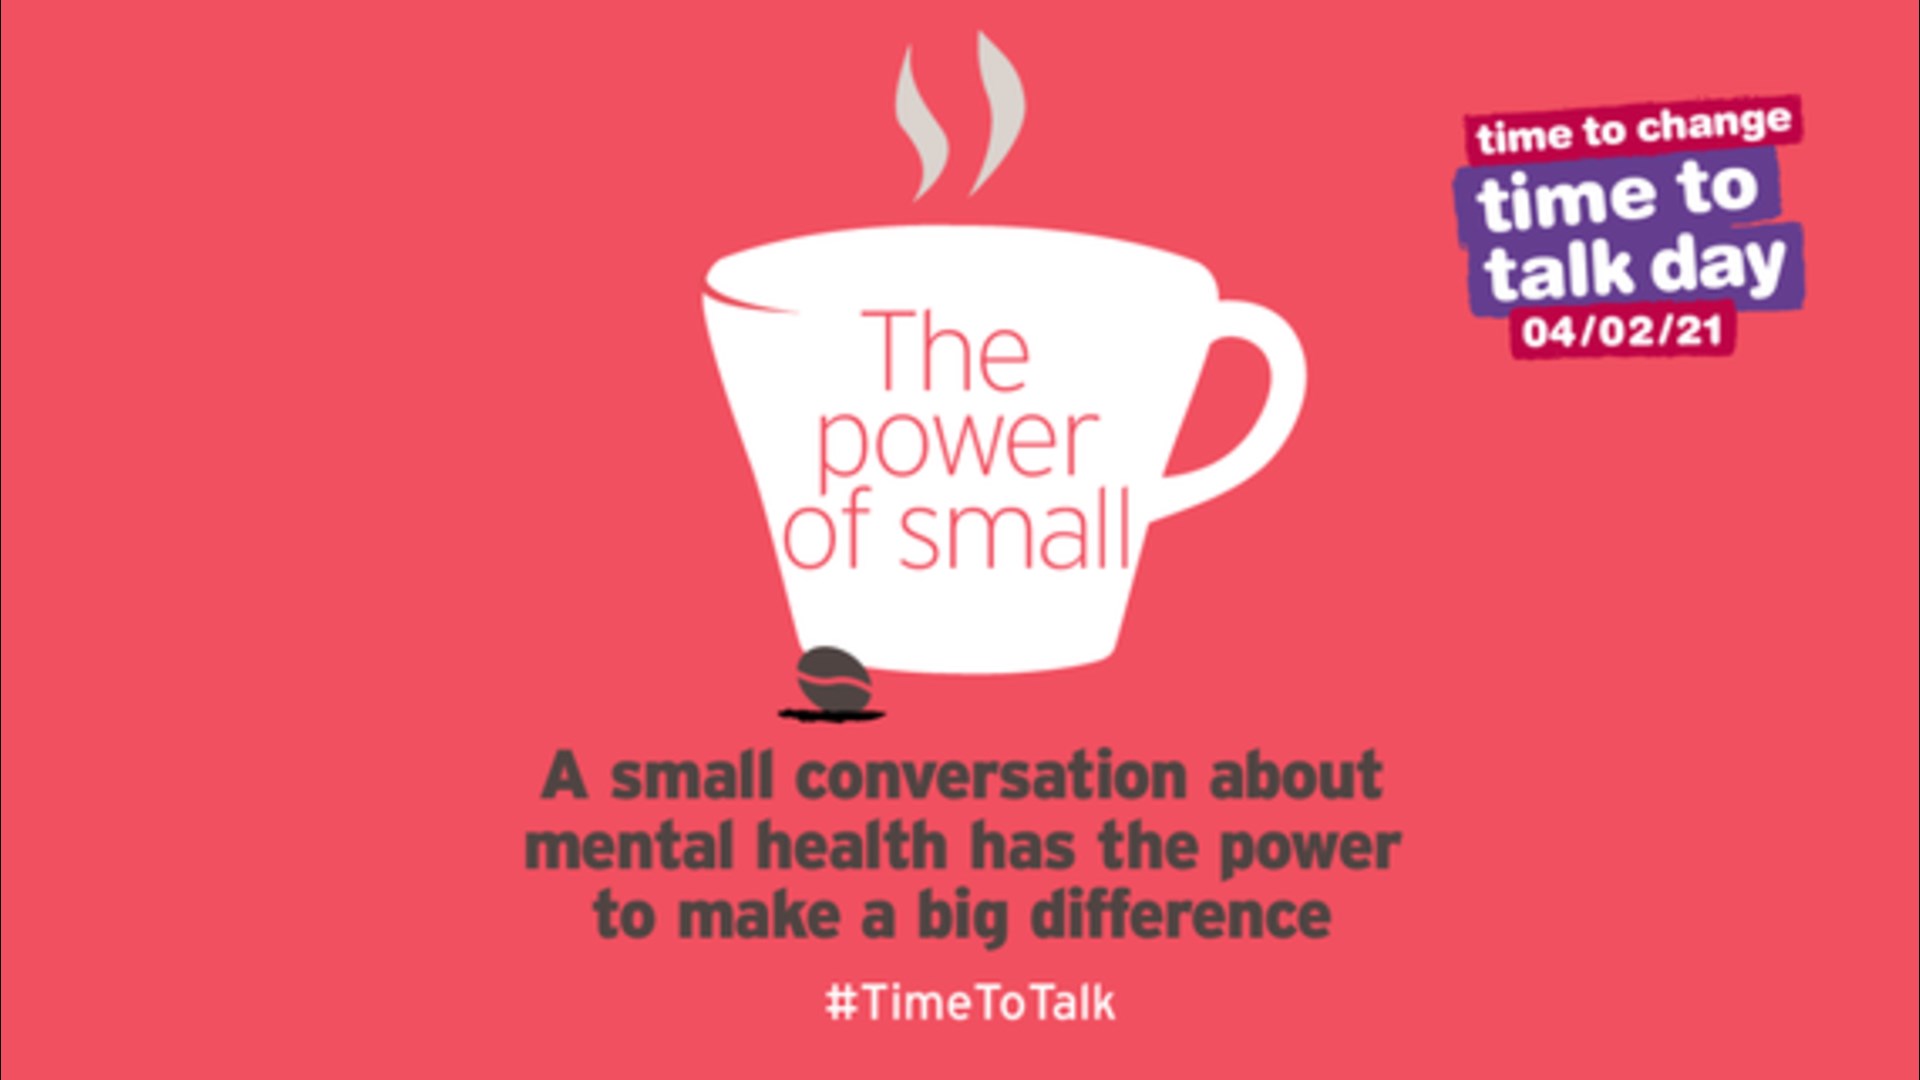 Chit-Chat: small talk is important for wellbeing